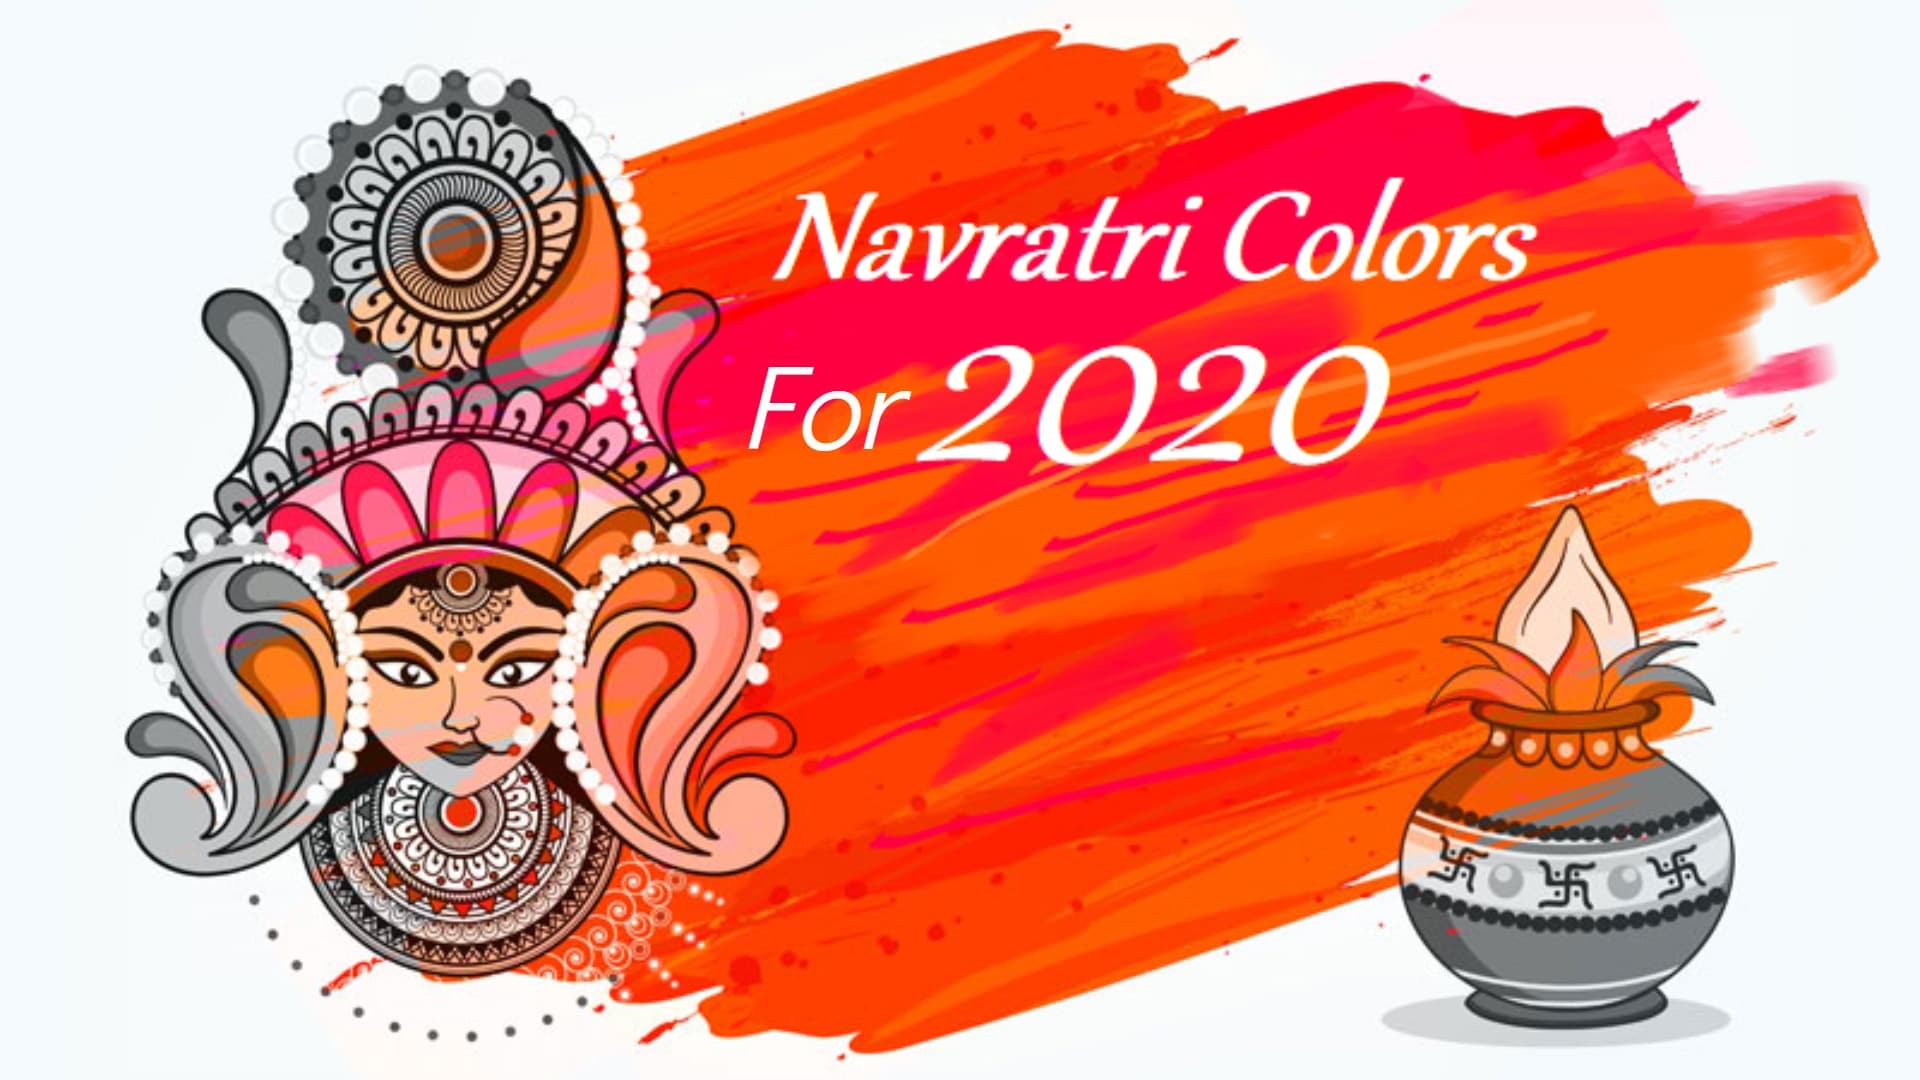 9 Navratri Colors List With Their Significance For 2020 0718